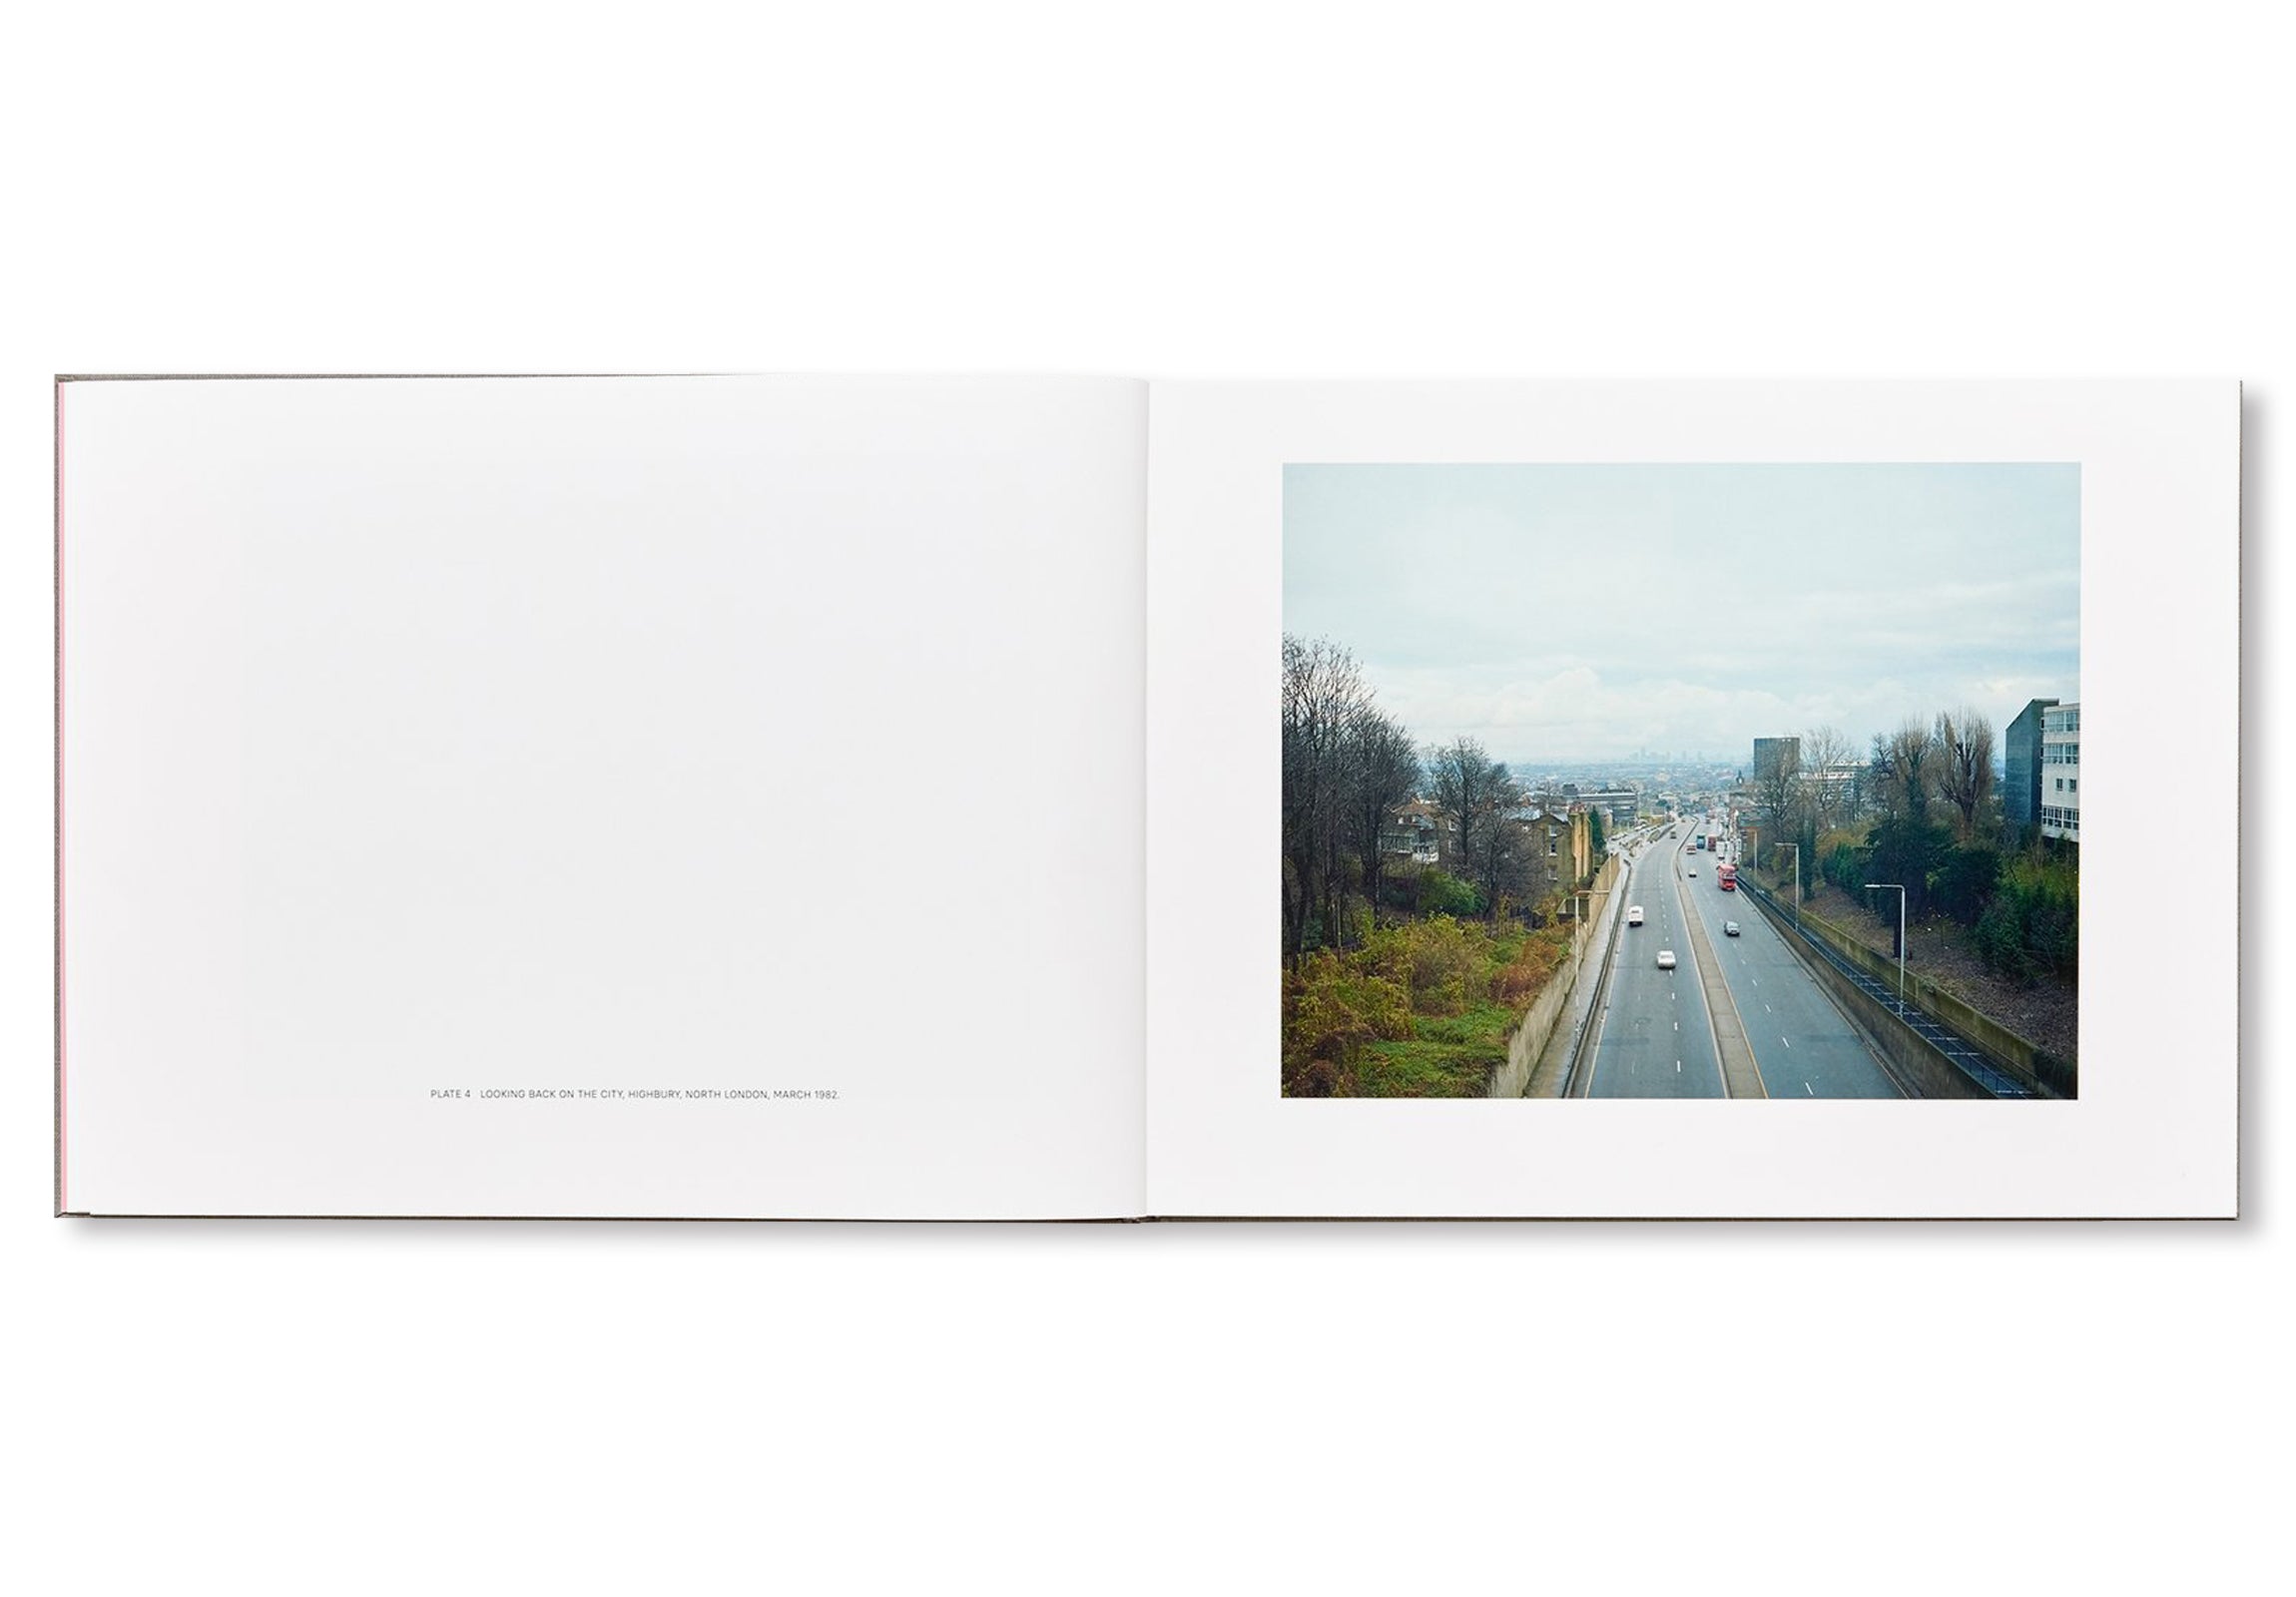 A1 - THE GREAT NORTH ROAD by Paul Graham [FIRST EDITION, SECOND PRINTING / SIGNED]